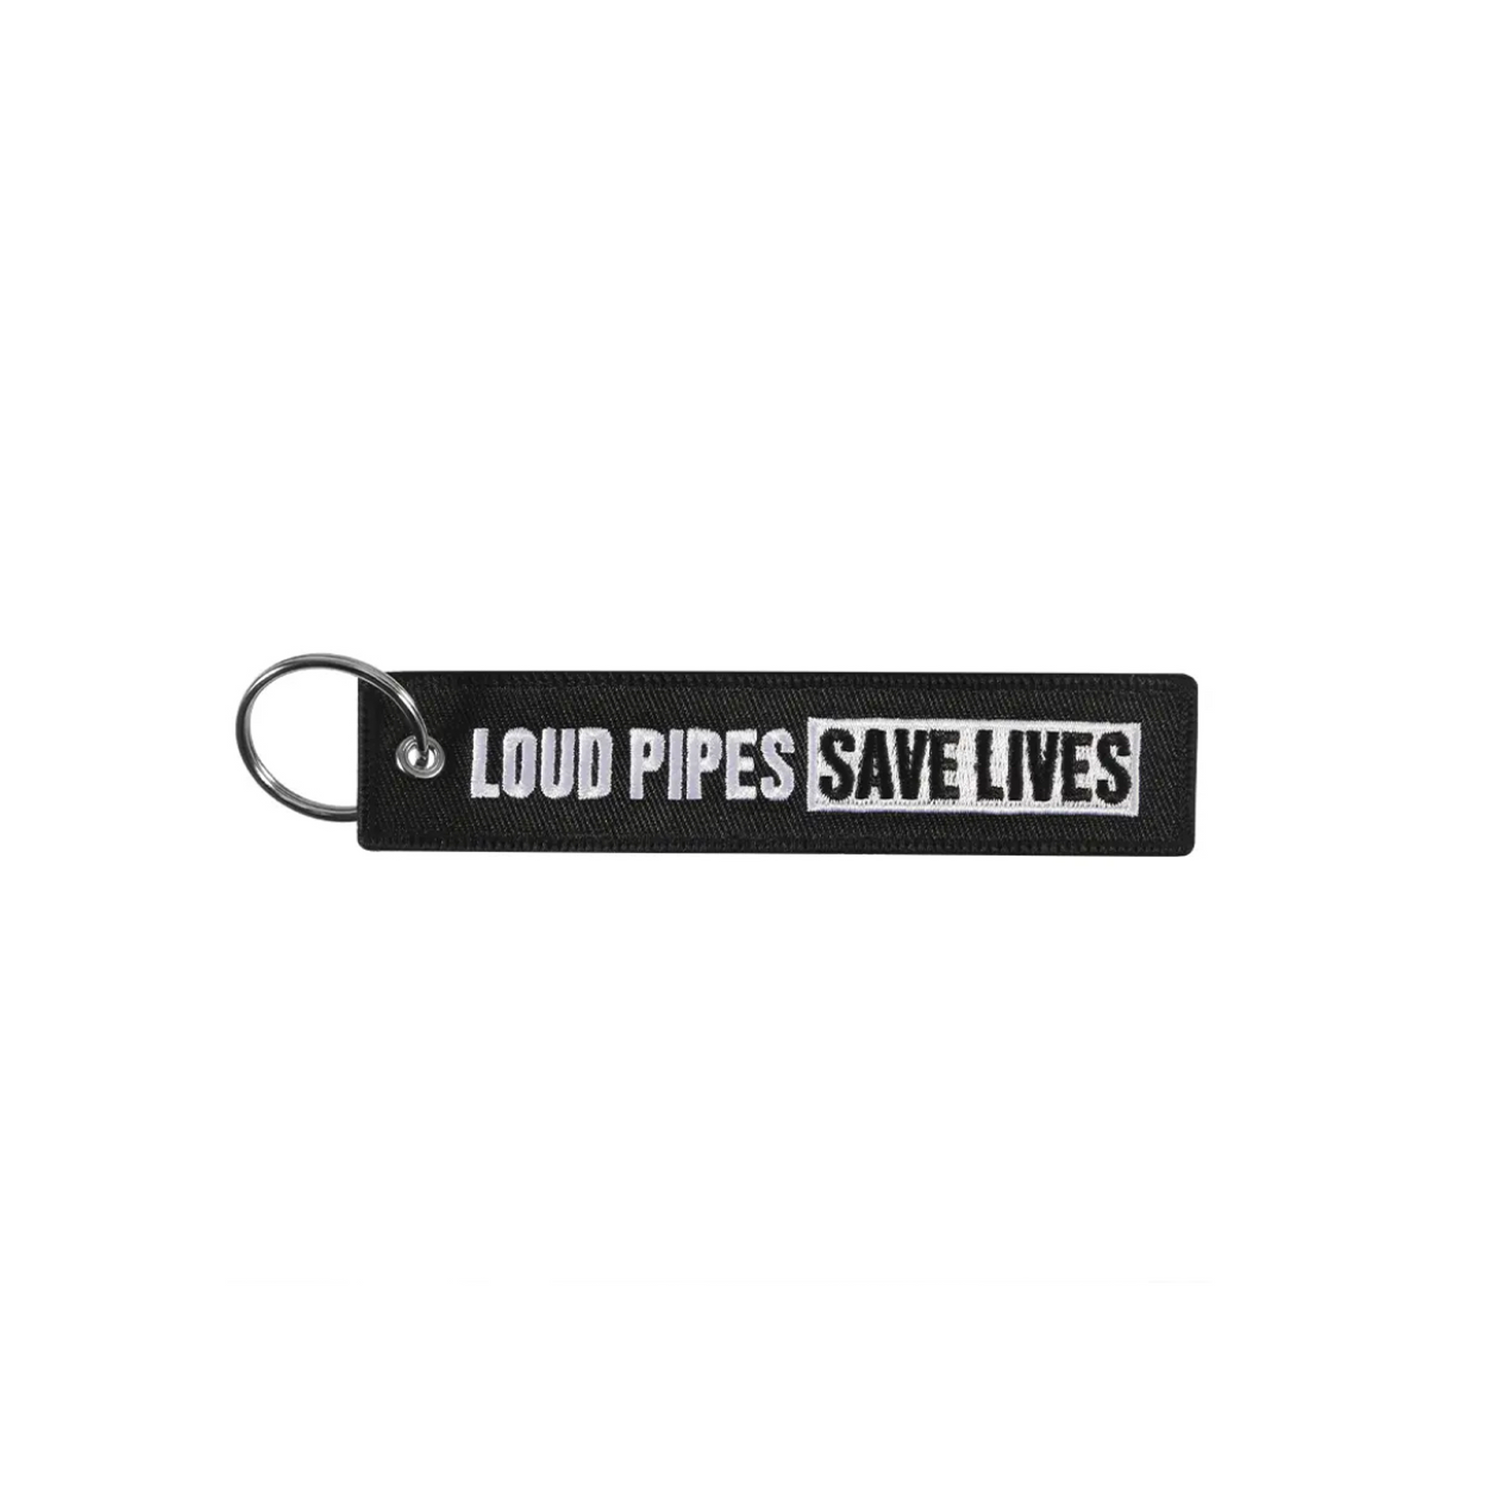 Motorcycle Keychain - Loud Pipes Save Lives